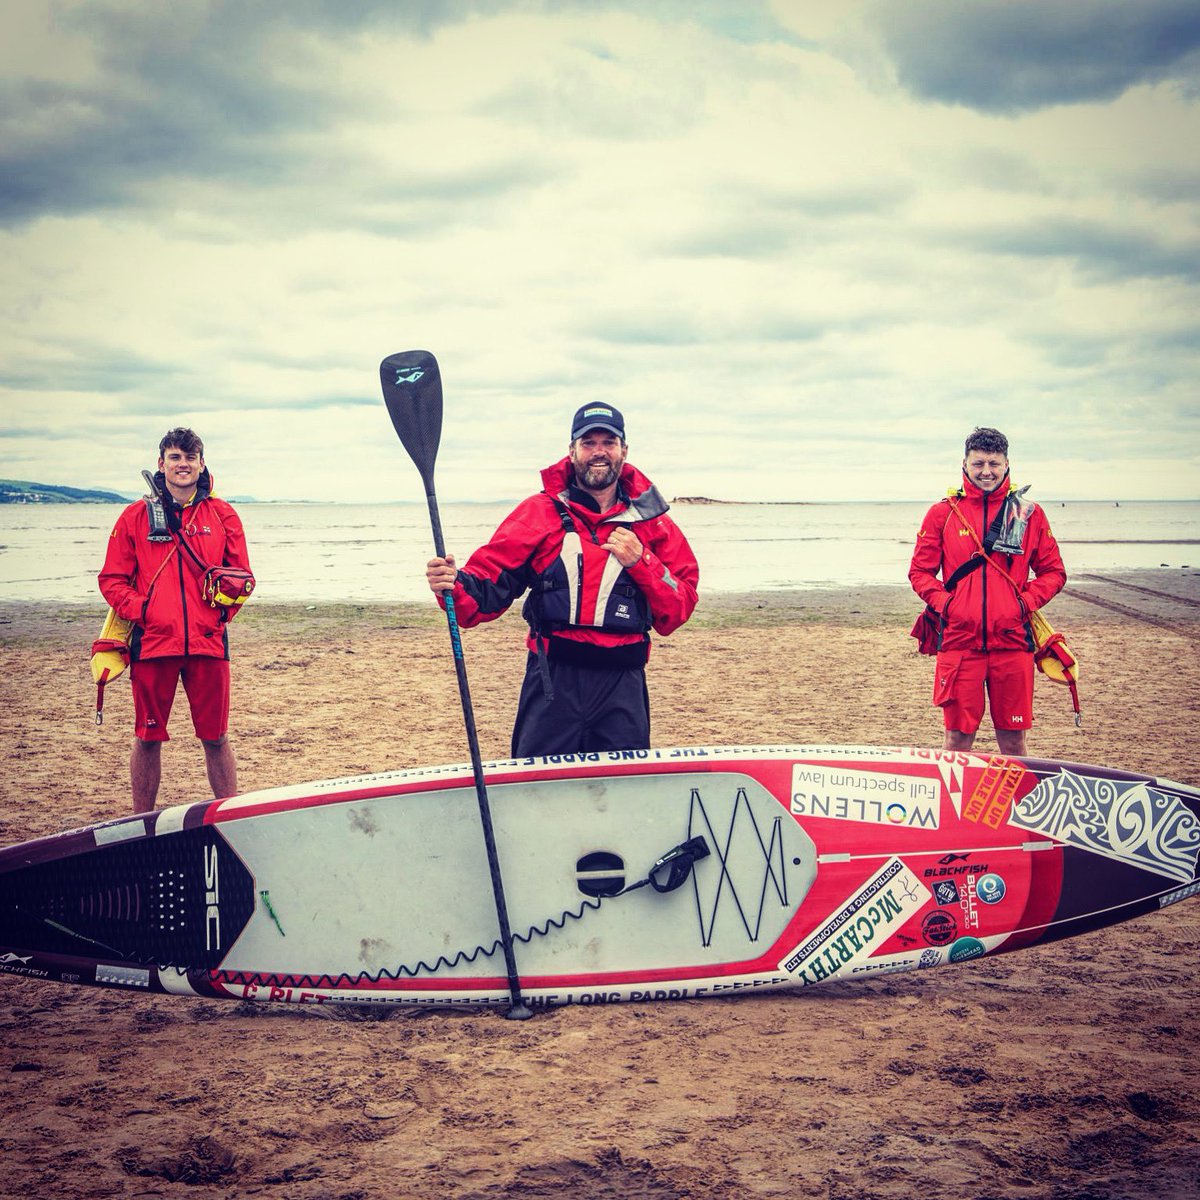 1000km in and we have had the most amazing hospitality & support from everyone, thank you.
Excited for the next 2800km!
#worldfirst #paddleboard #challenge